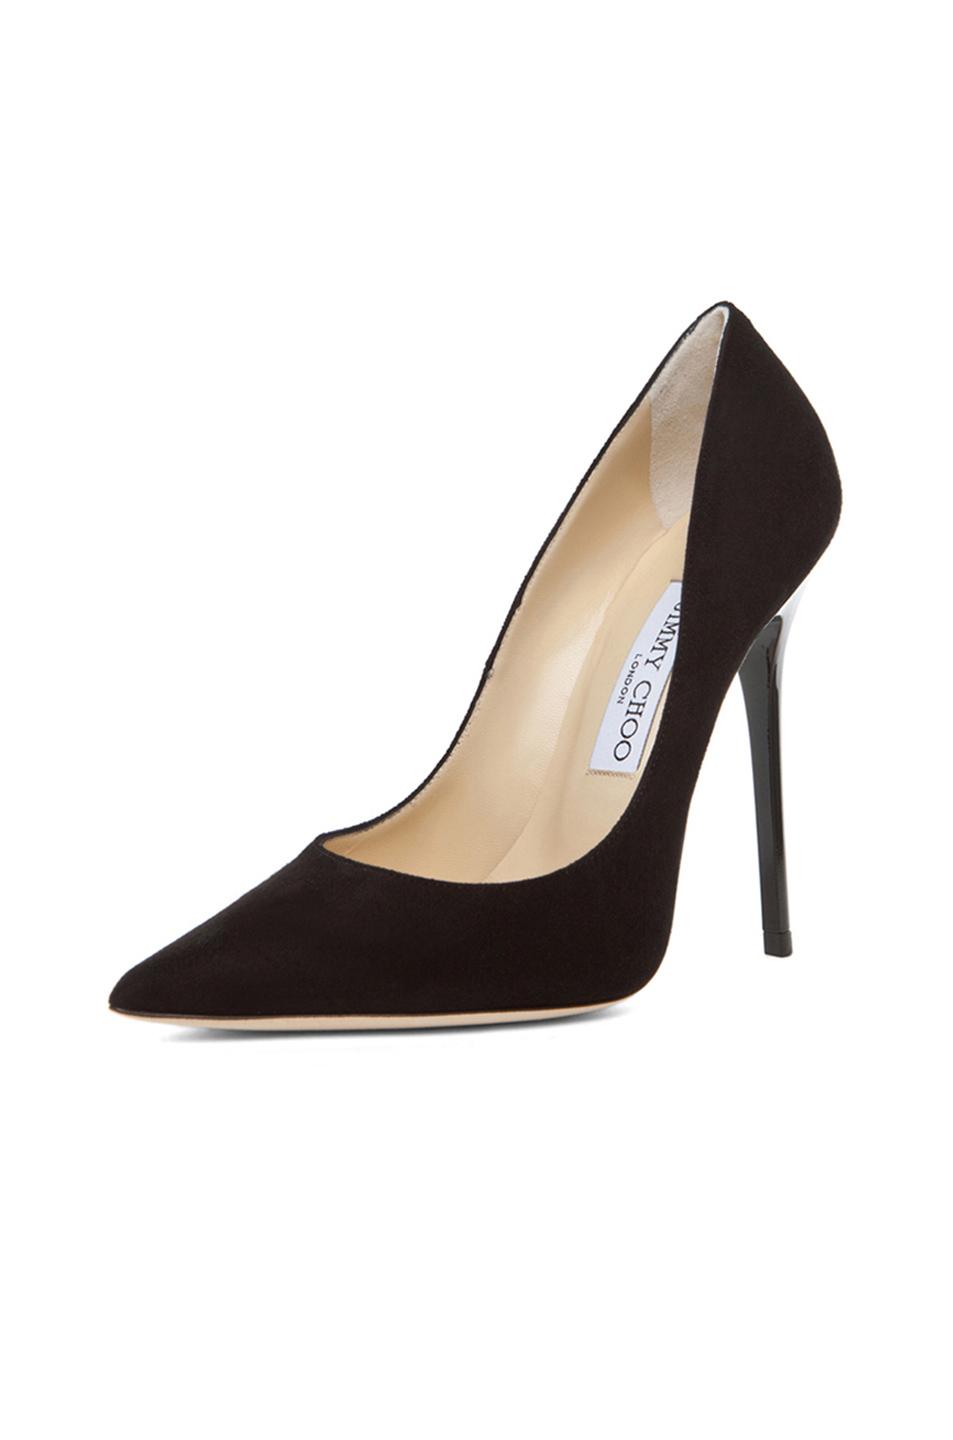 Jimmy Choo Anouk Black Suede Pointy Toe Pumps | ModeSens